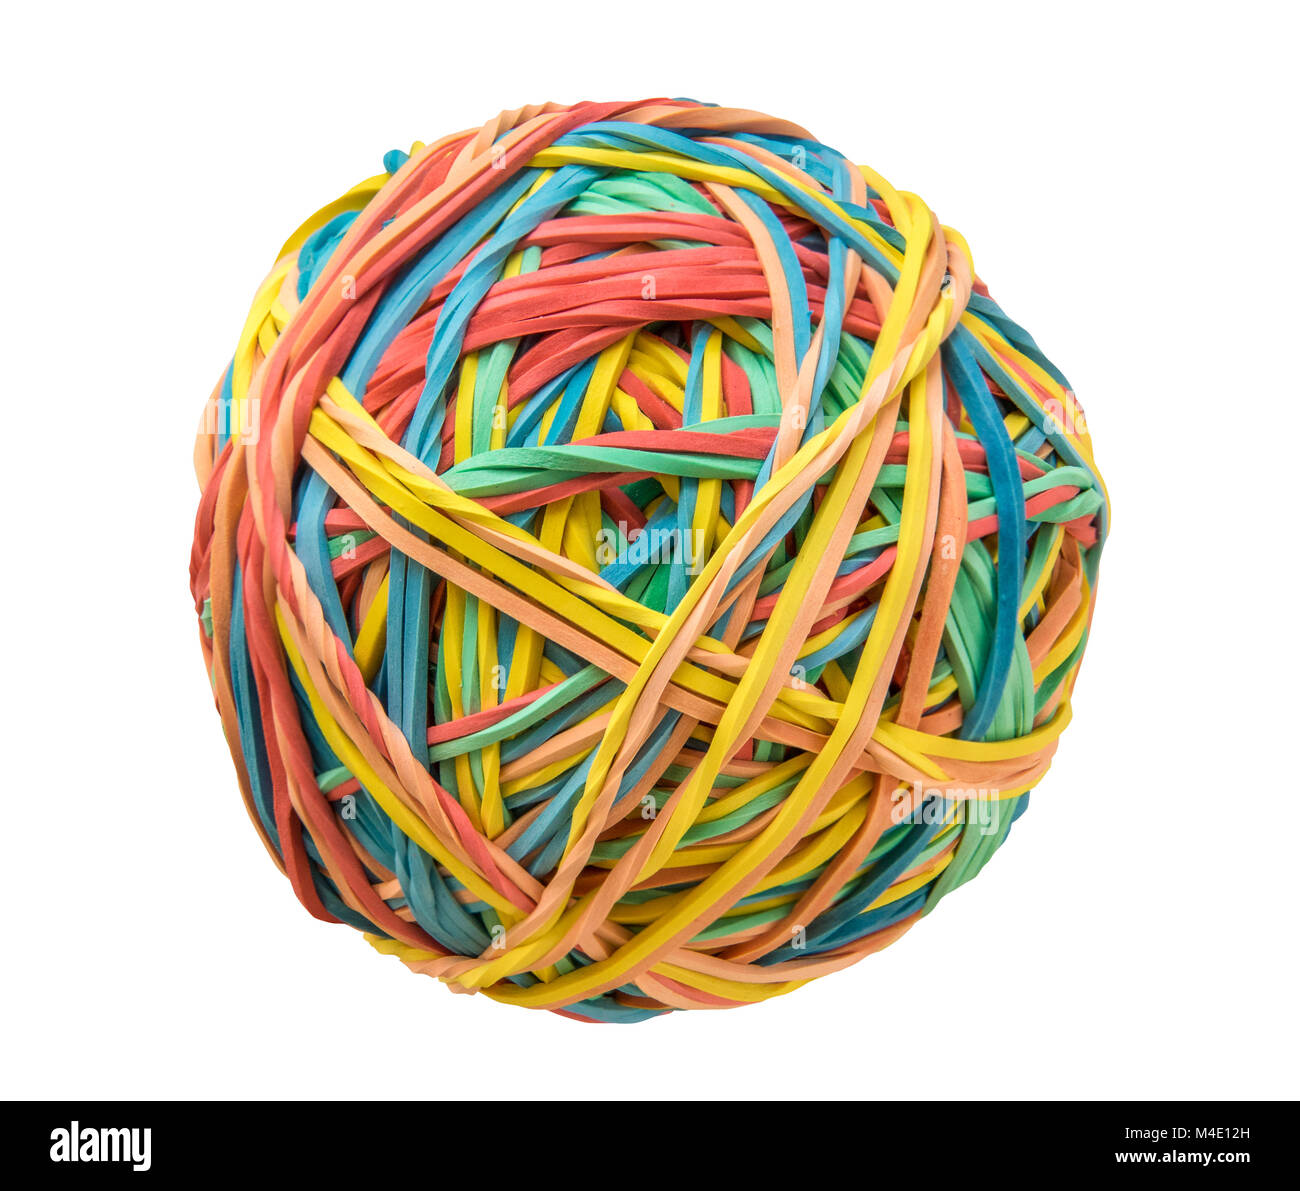 Isolated Rubber Band Ball Stock Photo